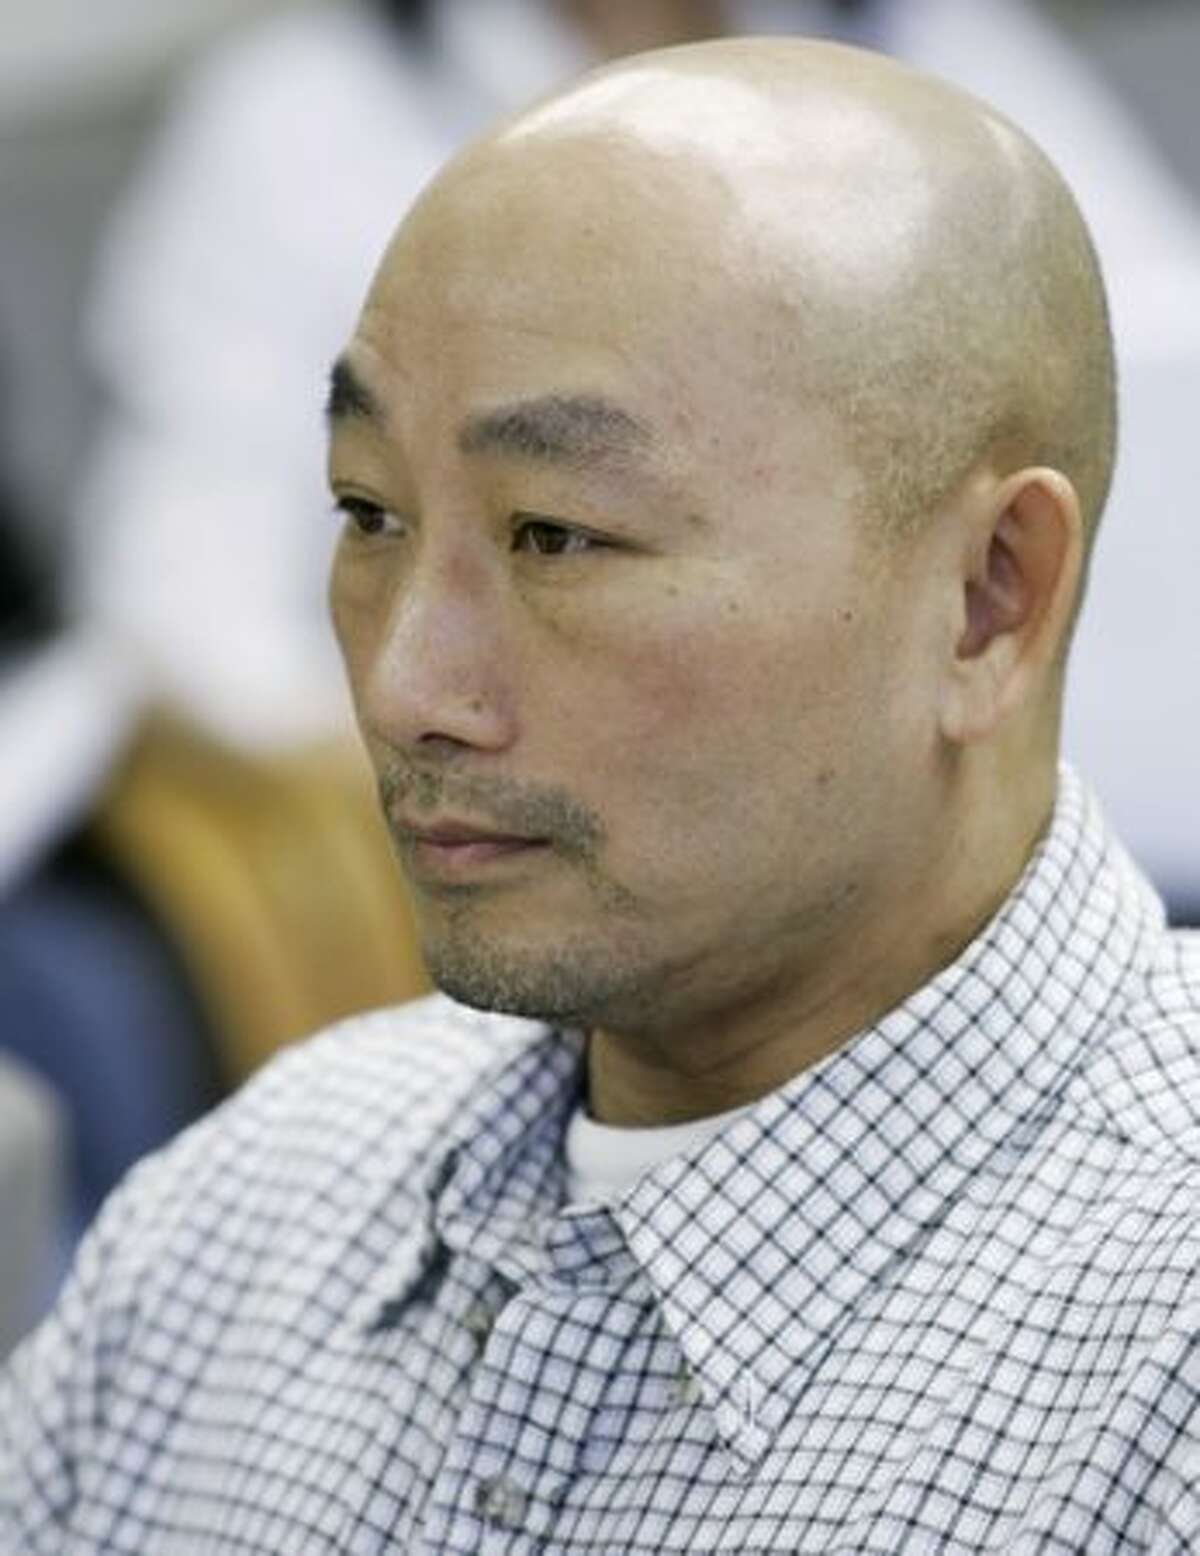 Wai Chiu "Tony" Ng looks on Feb. 14, 2007, prior to the official start of a hearing before the Indeterminate Sentence Review Board at the McNeil Island Corrections Center on McNeil Island.